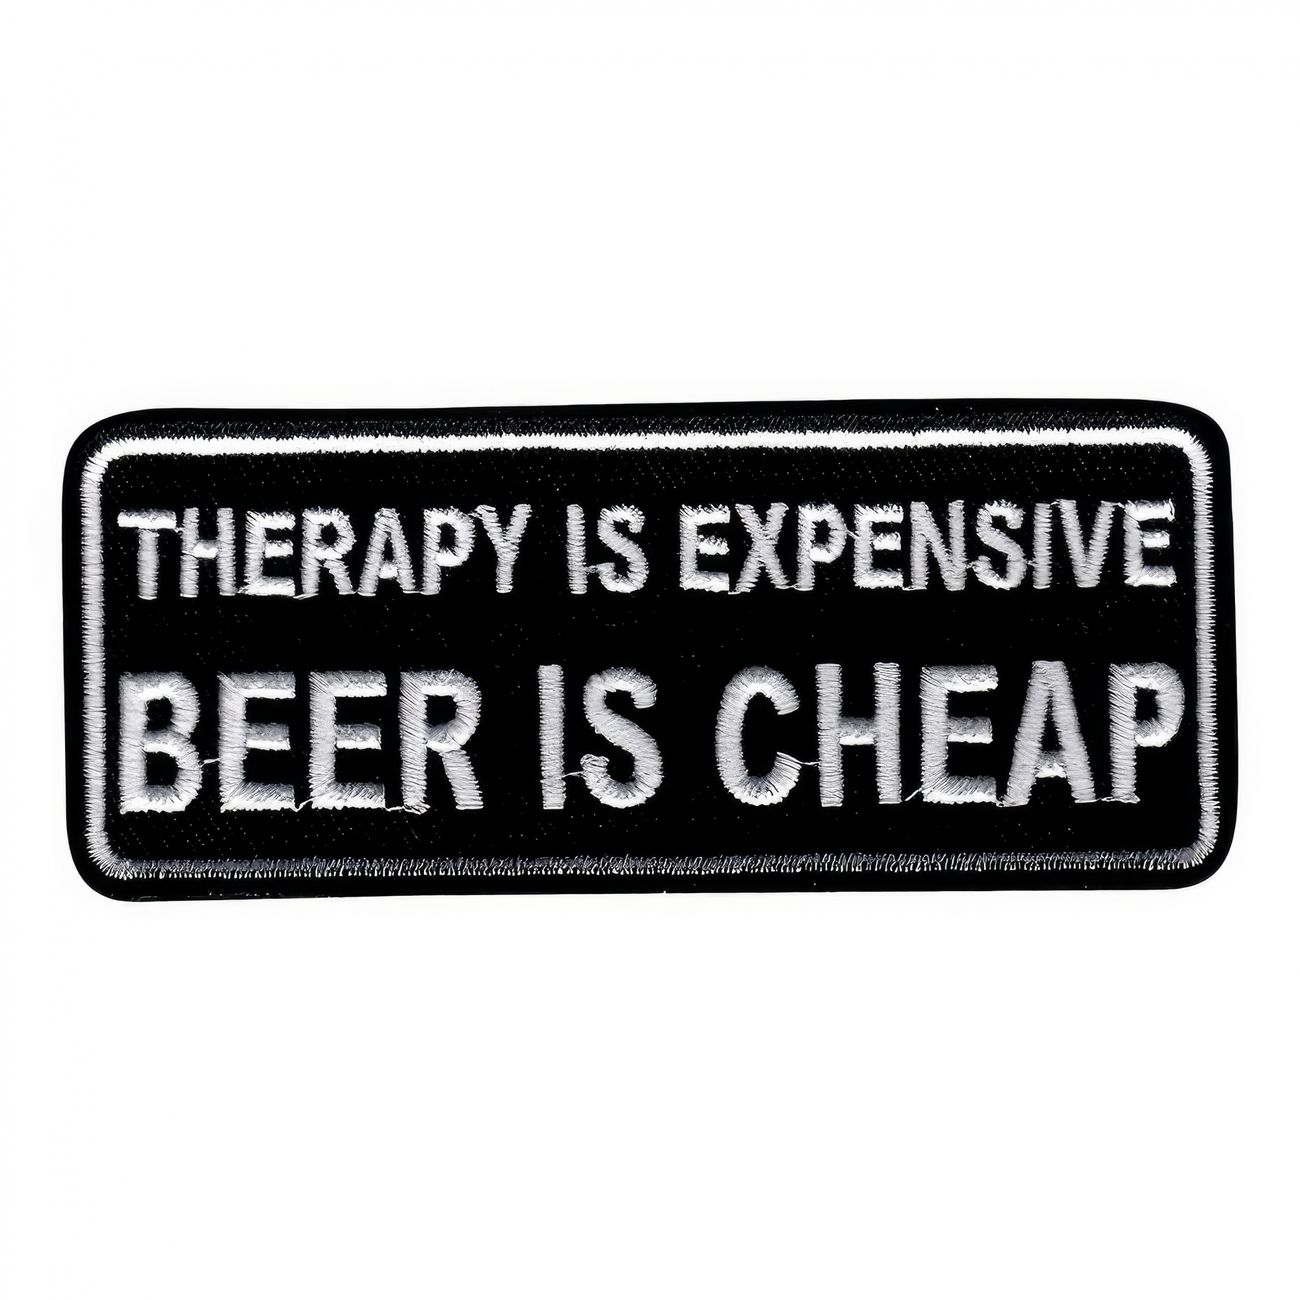 tygmarke-therapy-is-expensive-beer-is-cheap-93740-1